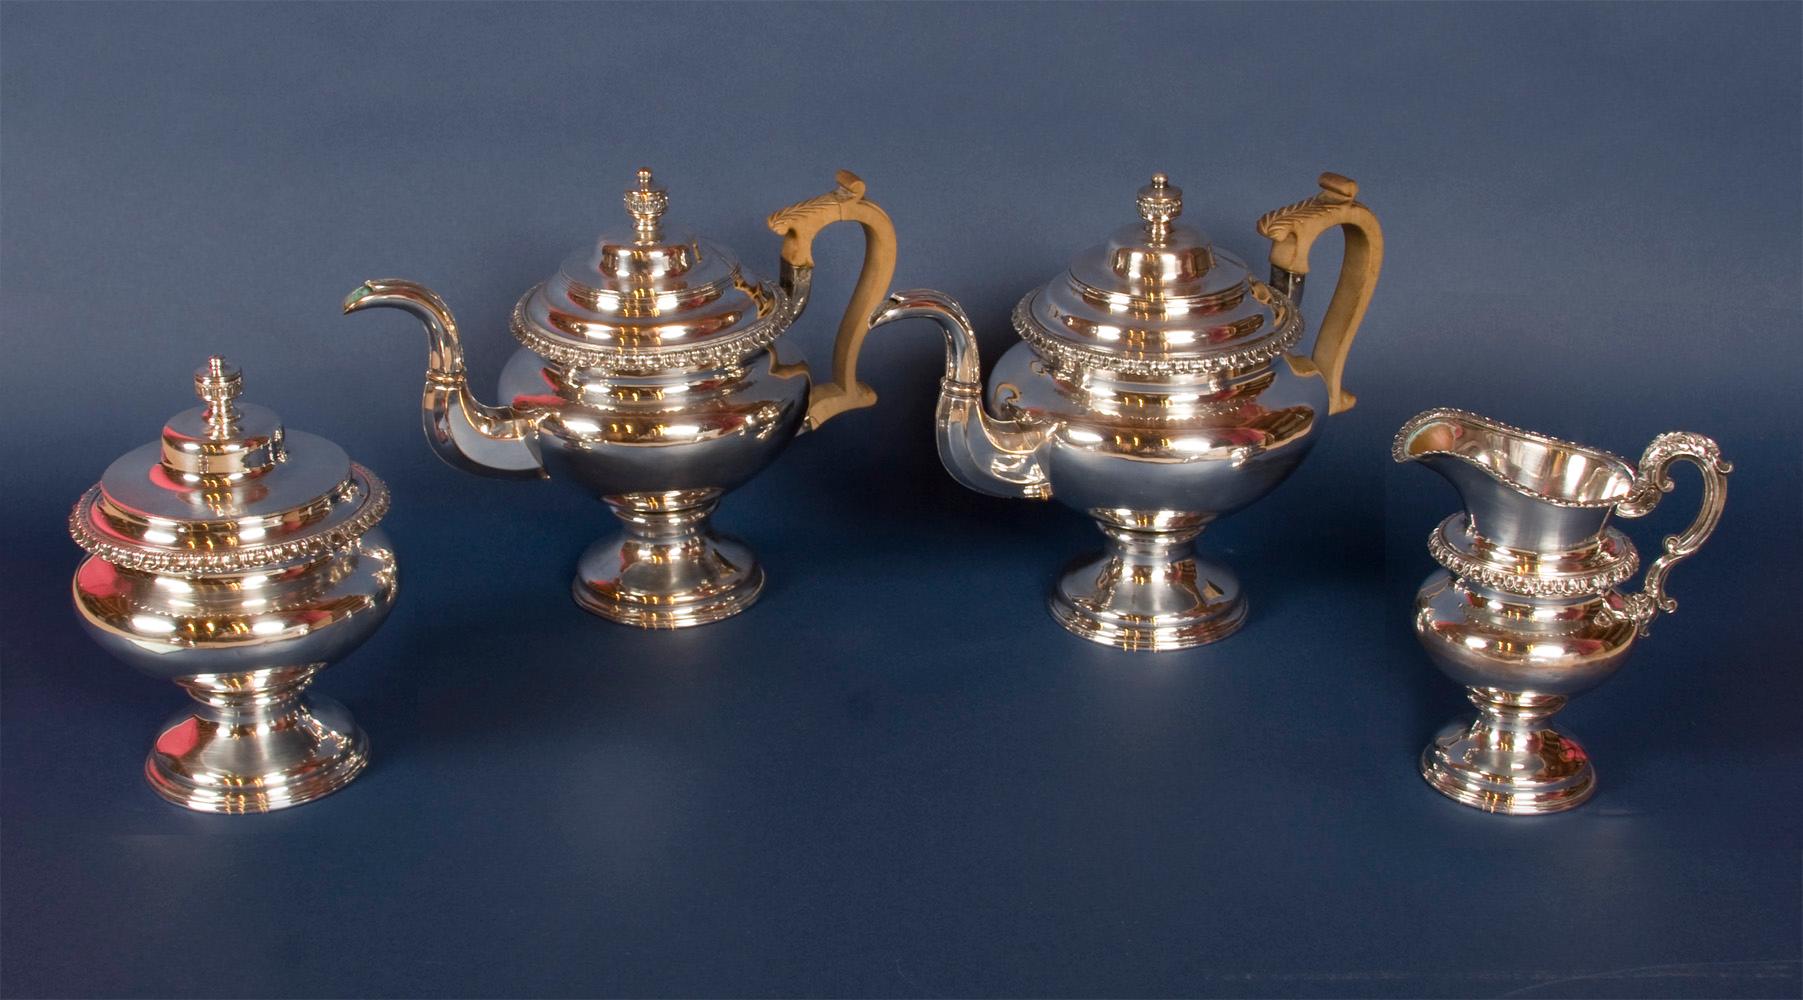 Hand-Crafted Sheffield Plate Tea and Coffee Service, American, Early 19th Century For Sale